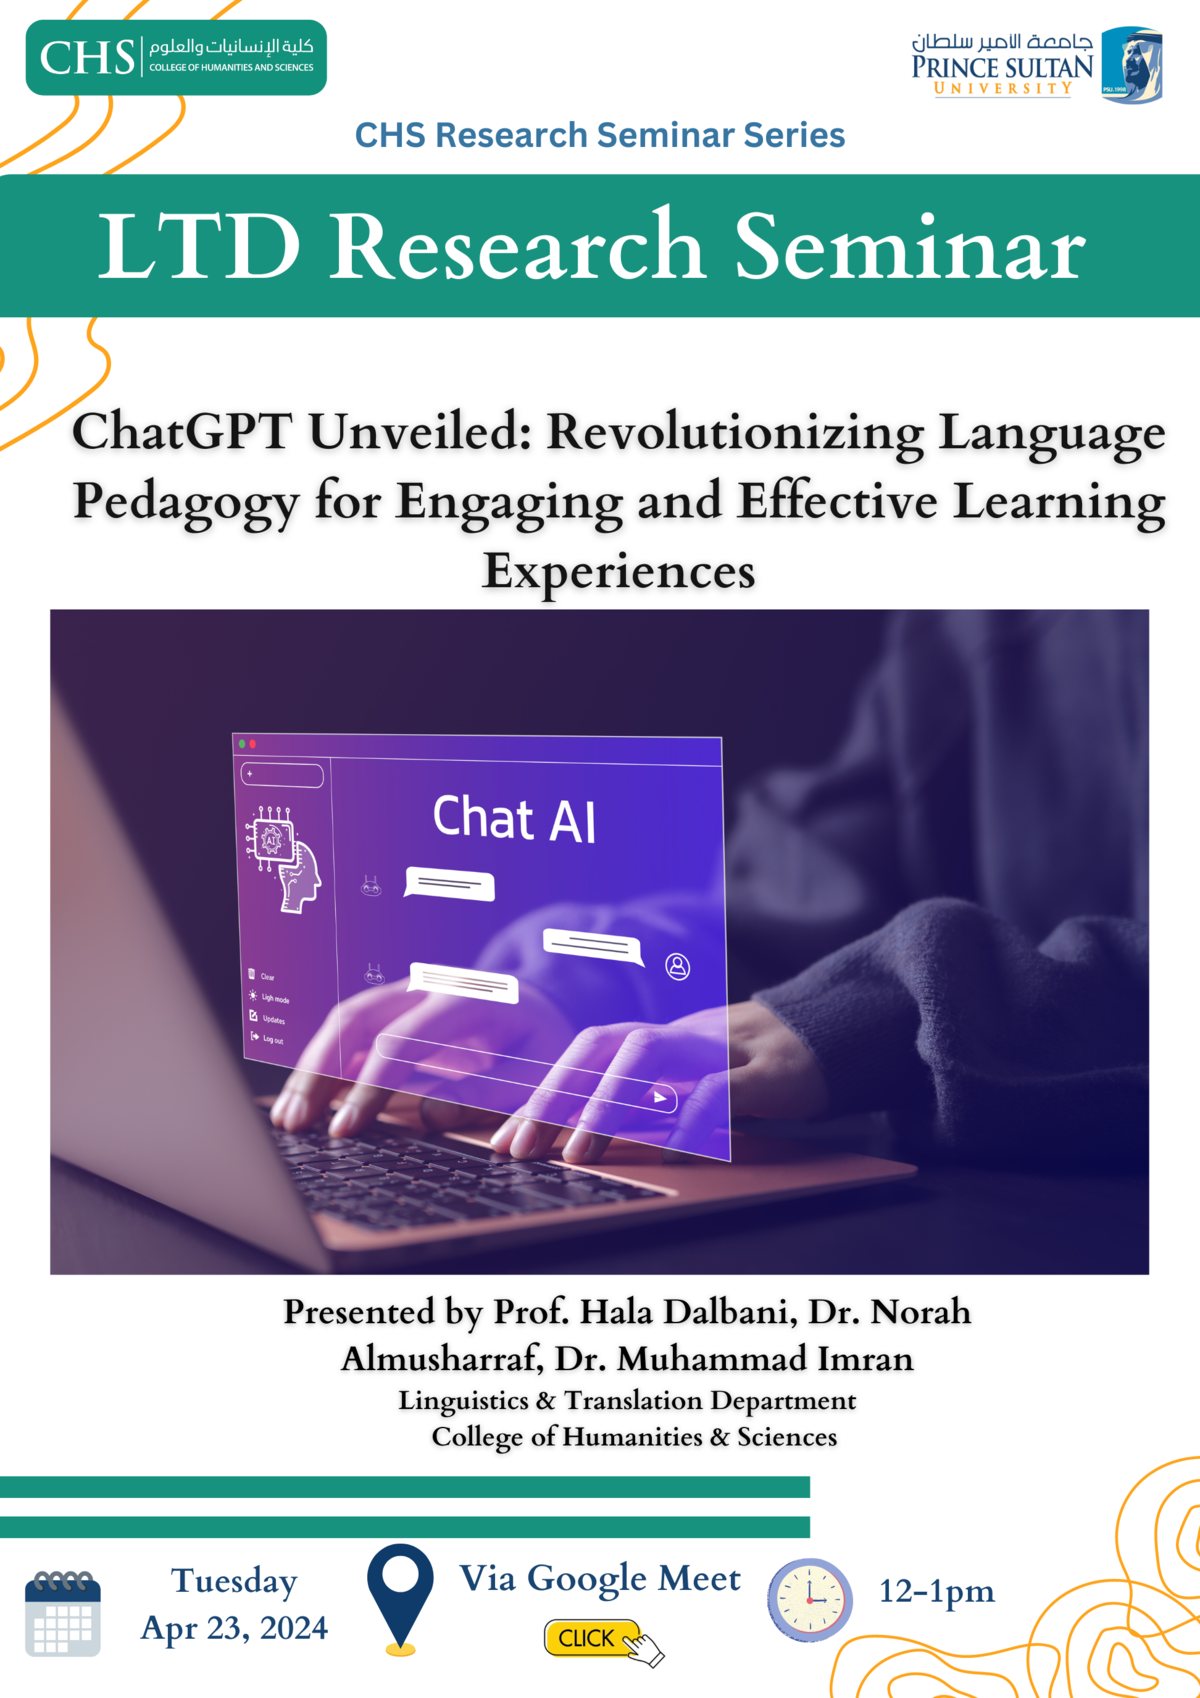 LTD Research Seminar: ChatGPT Unveiled: Revolutionizing Language Pedagogy for Engaging and Effective Learning Experiences